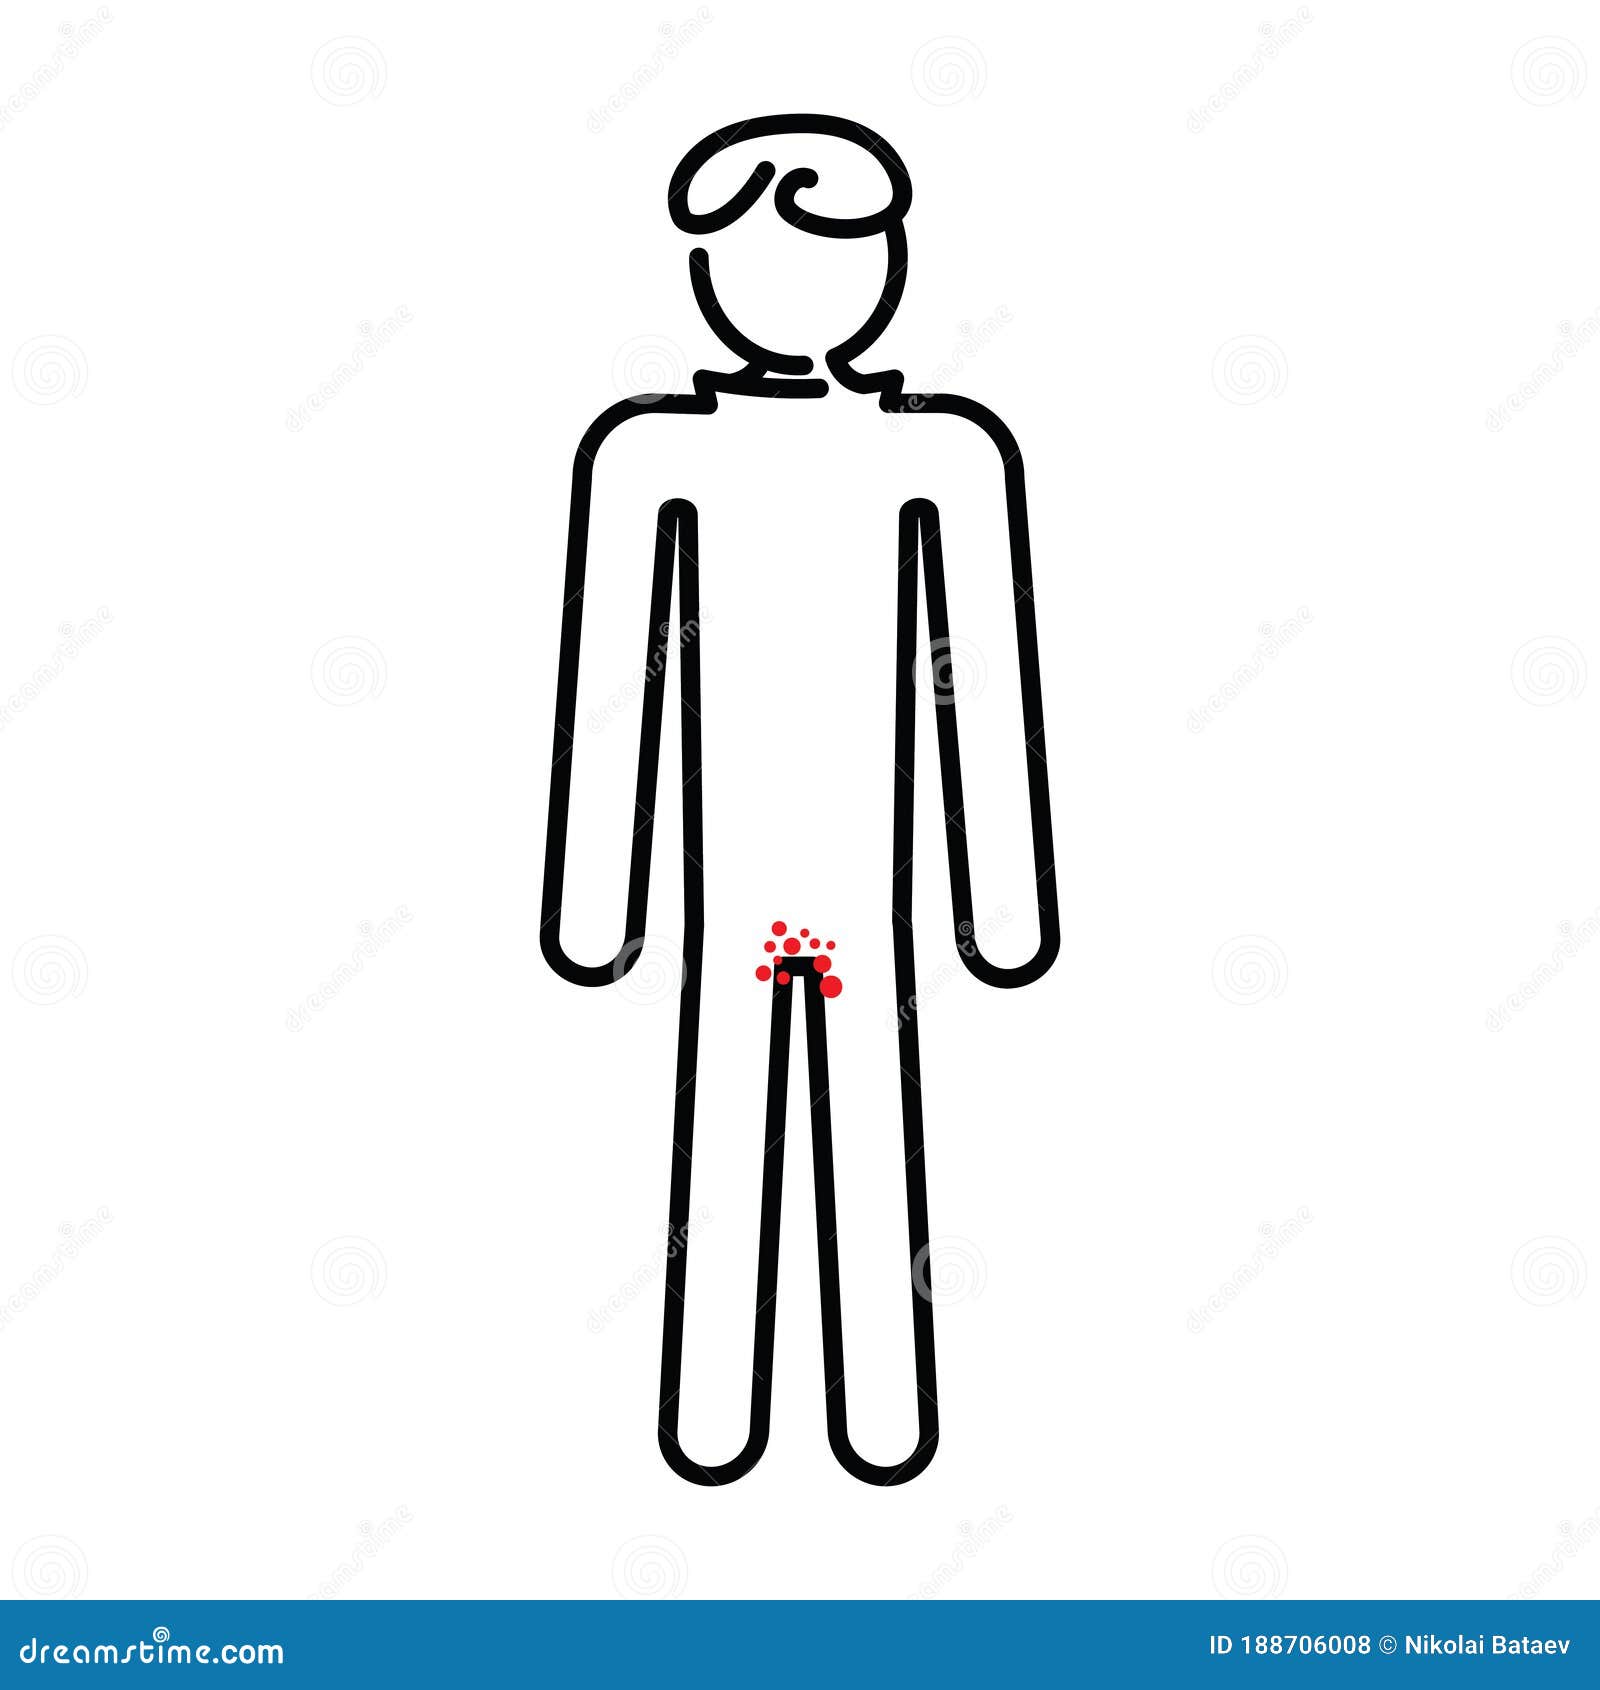 Groin Area Stock Illustrations – 19 Groin Area Stock Illustrations, Vectors  & Clipart - Dreamstime